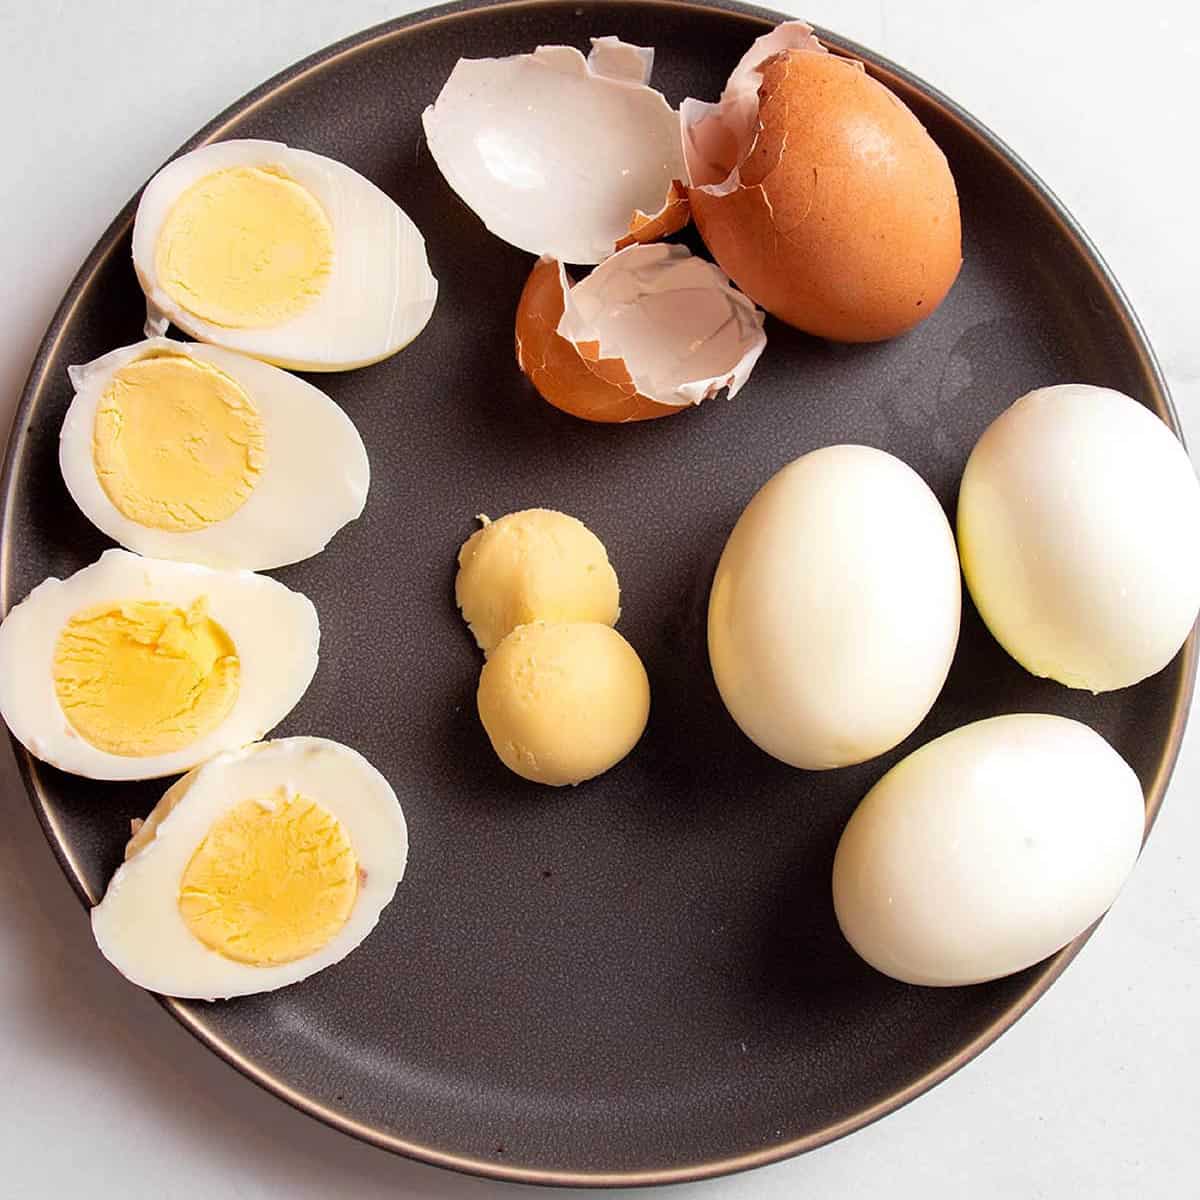 https://dirtanddough.com/wp-content/uploads/2023/03/how-to-hard-boil-eggs-featured-image.jpg